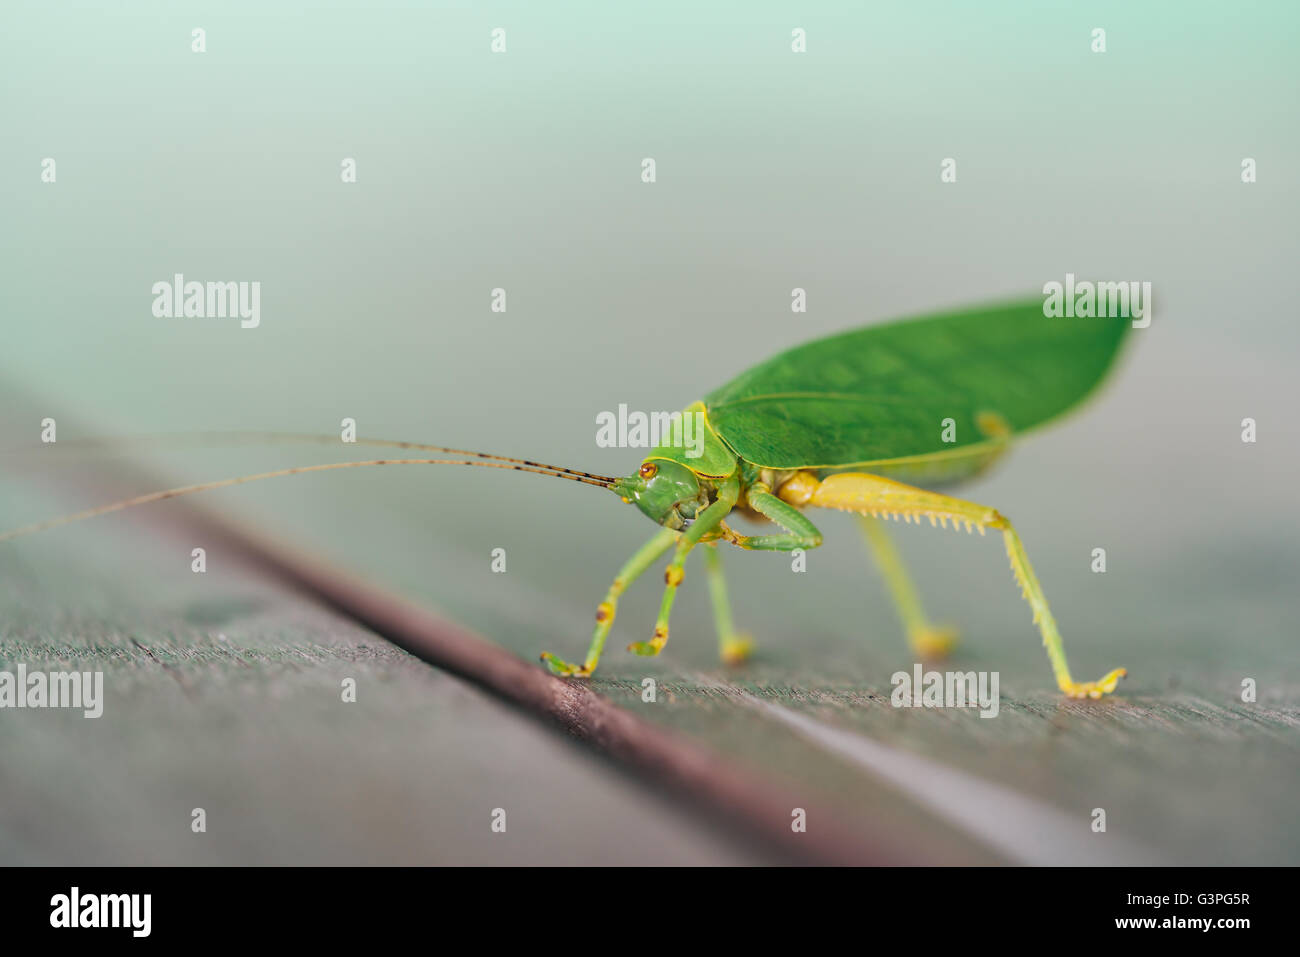 Green bush cricket or long-horned grasshopper licking legs on wooden floor, blur bokeh background with copy space Stock Photo